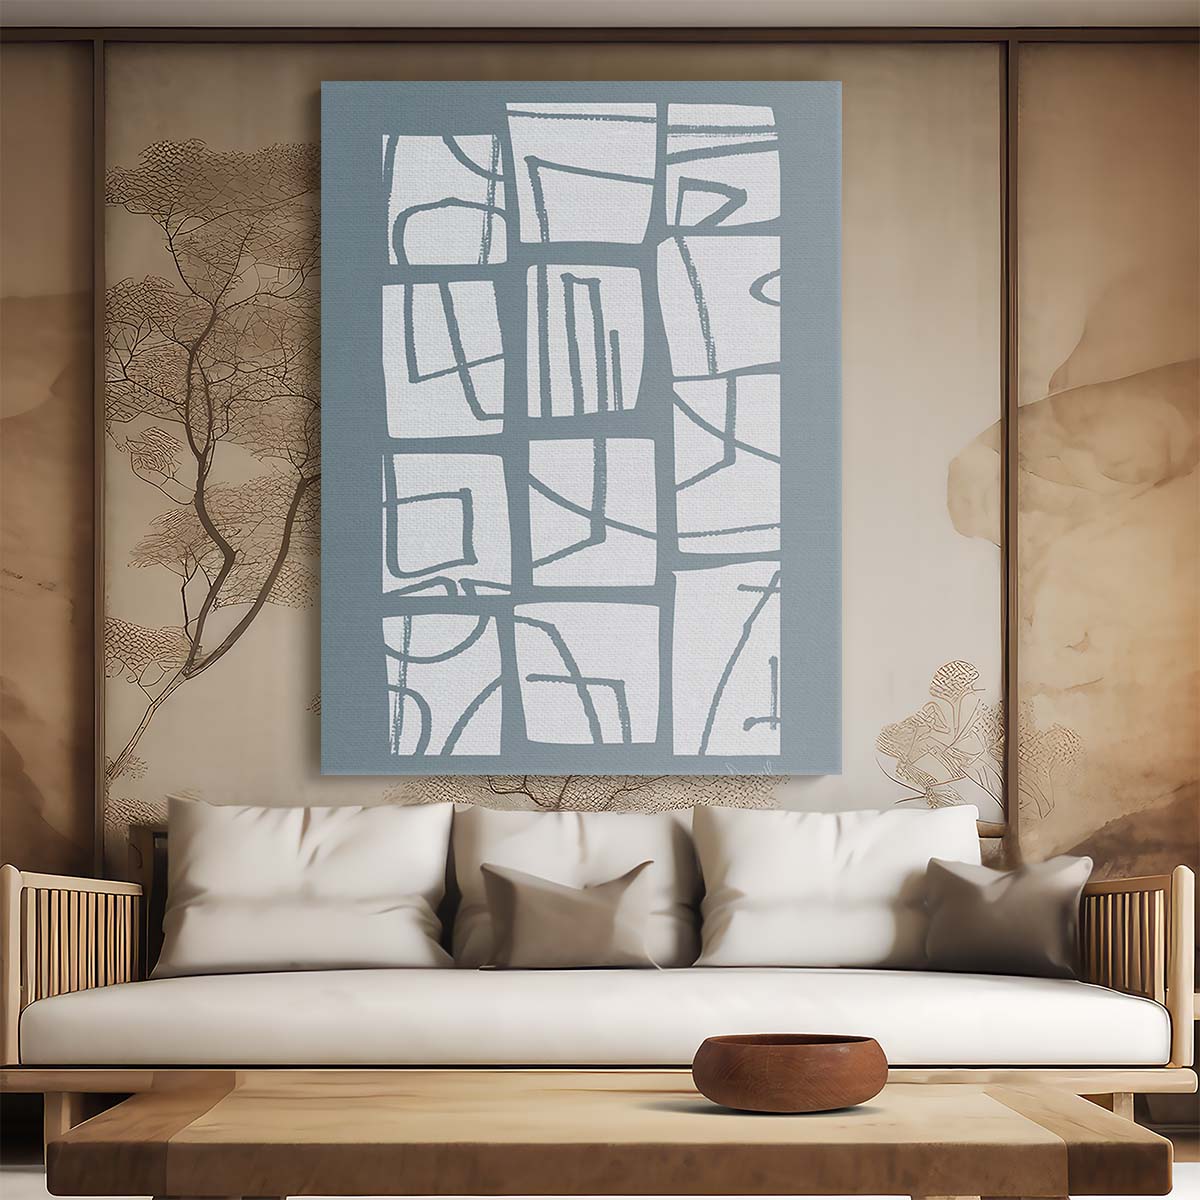 Dan Hobday's Minimalistic Abstract Geometric Illustration - Contemporary Painted Shapes by Luxuriance Designs, made in USA